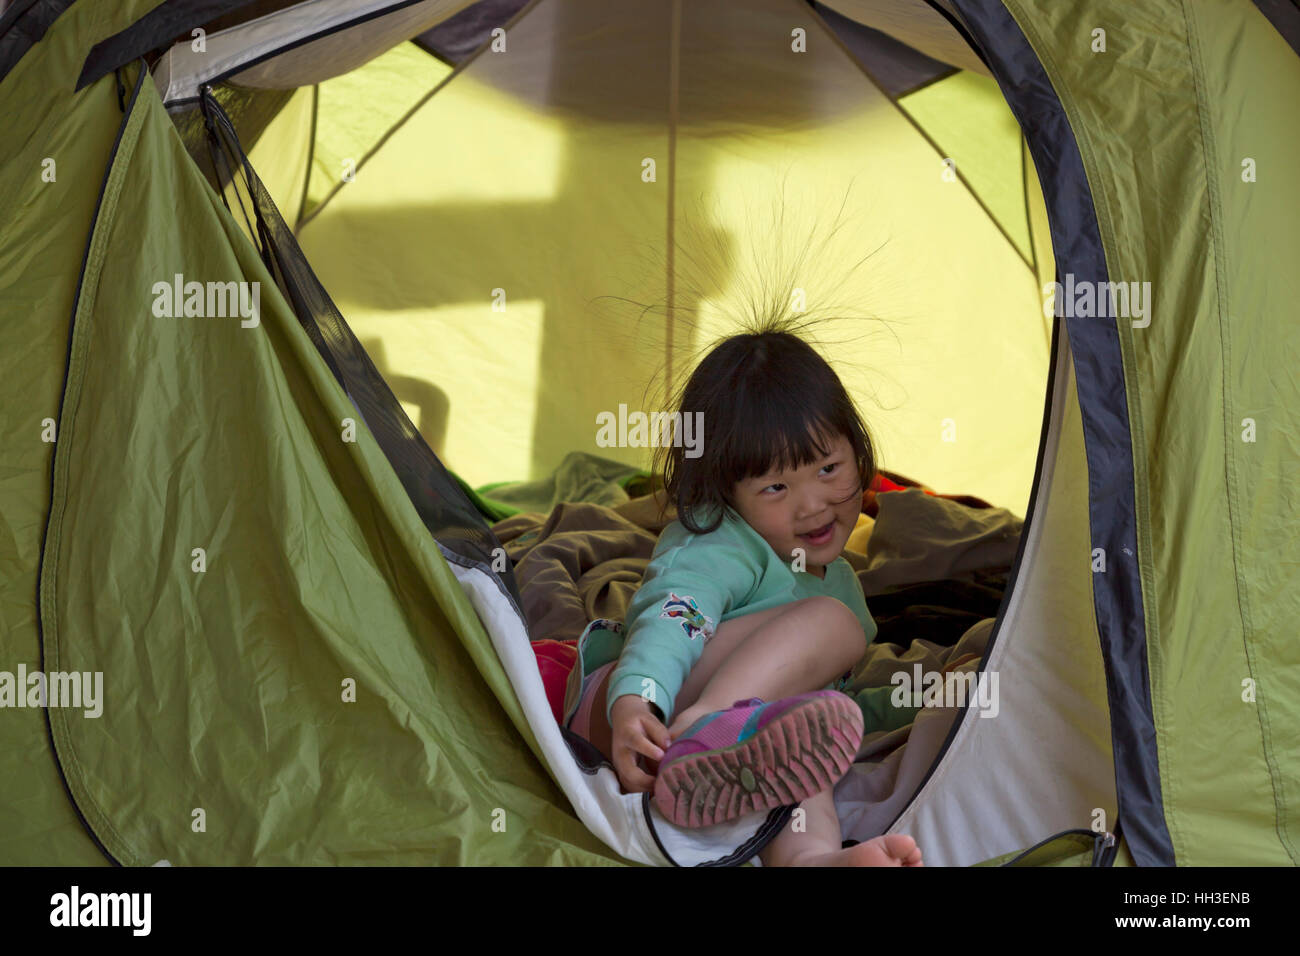 A Chinese little girl with some hair standing due to static electricity plays in a tent during a family camping trip in China. Stock Photo